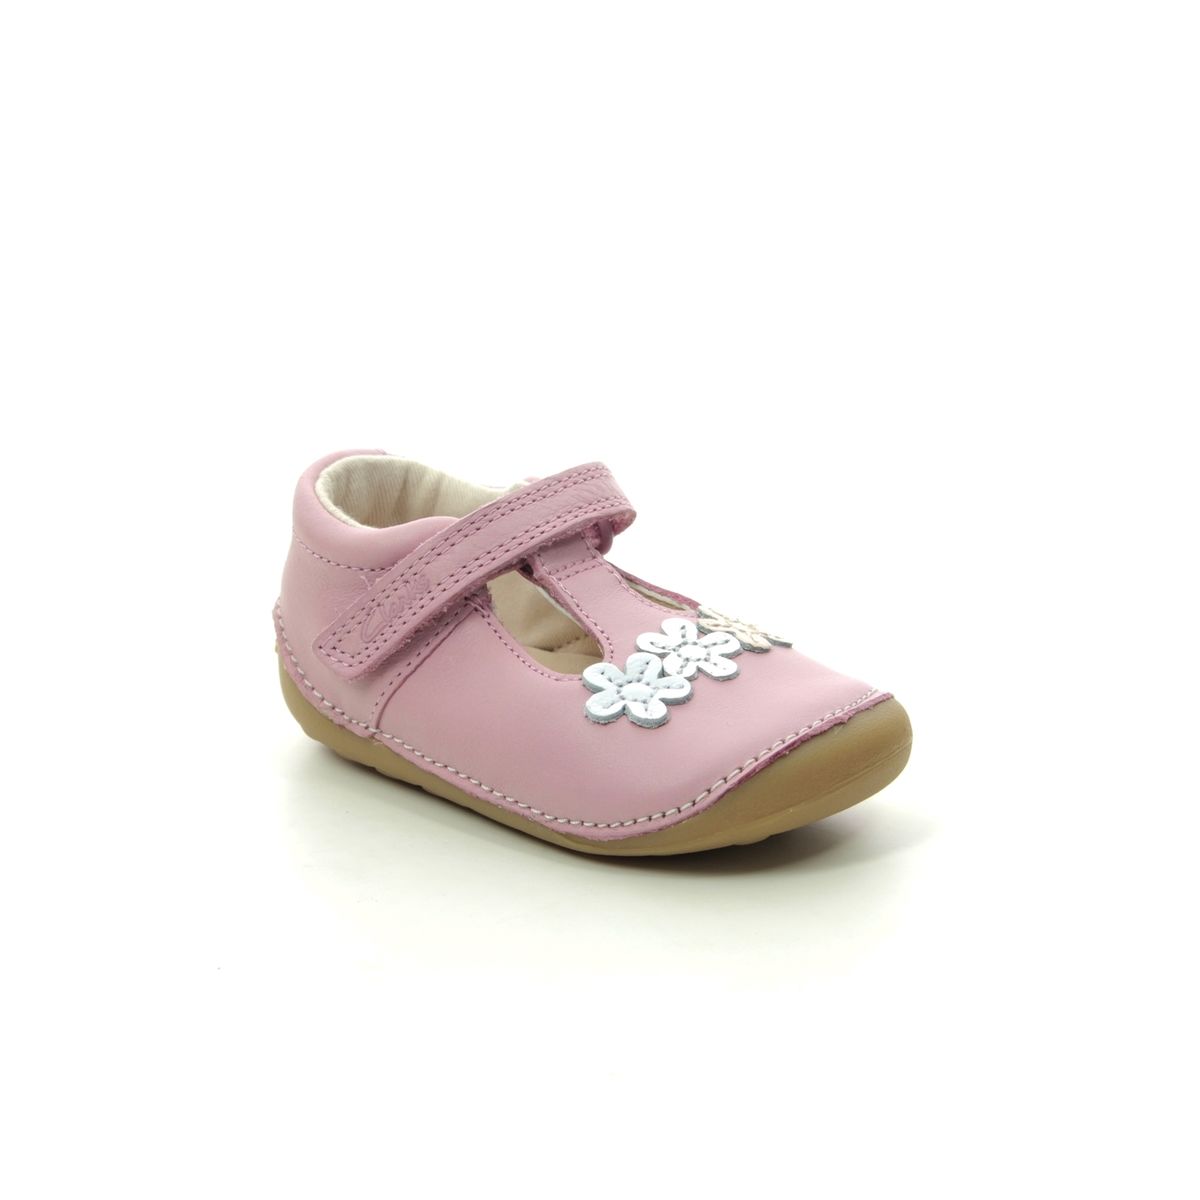 Tiny T G Fit Pink Leather girls first and baby shoes